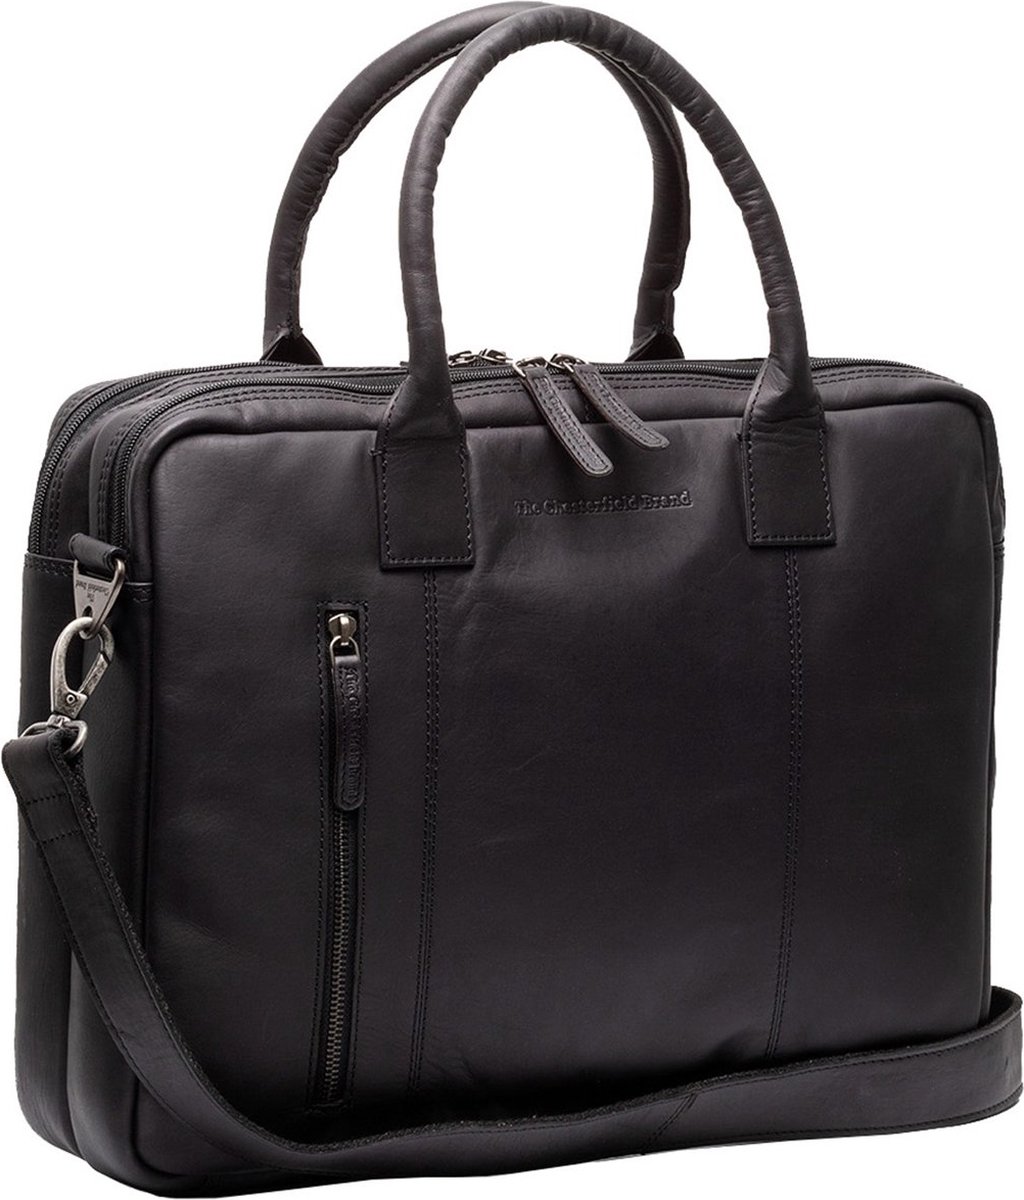 The Chesterfield Brand Special Laptopbag 15.6 black